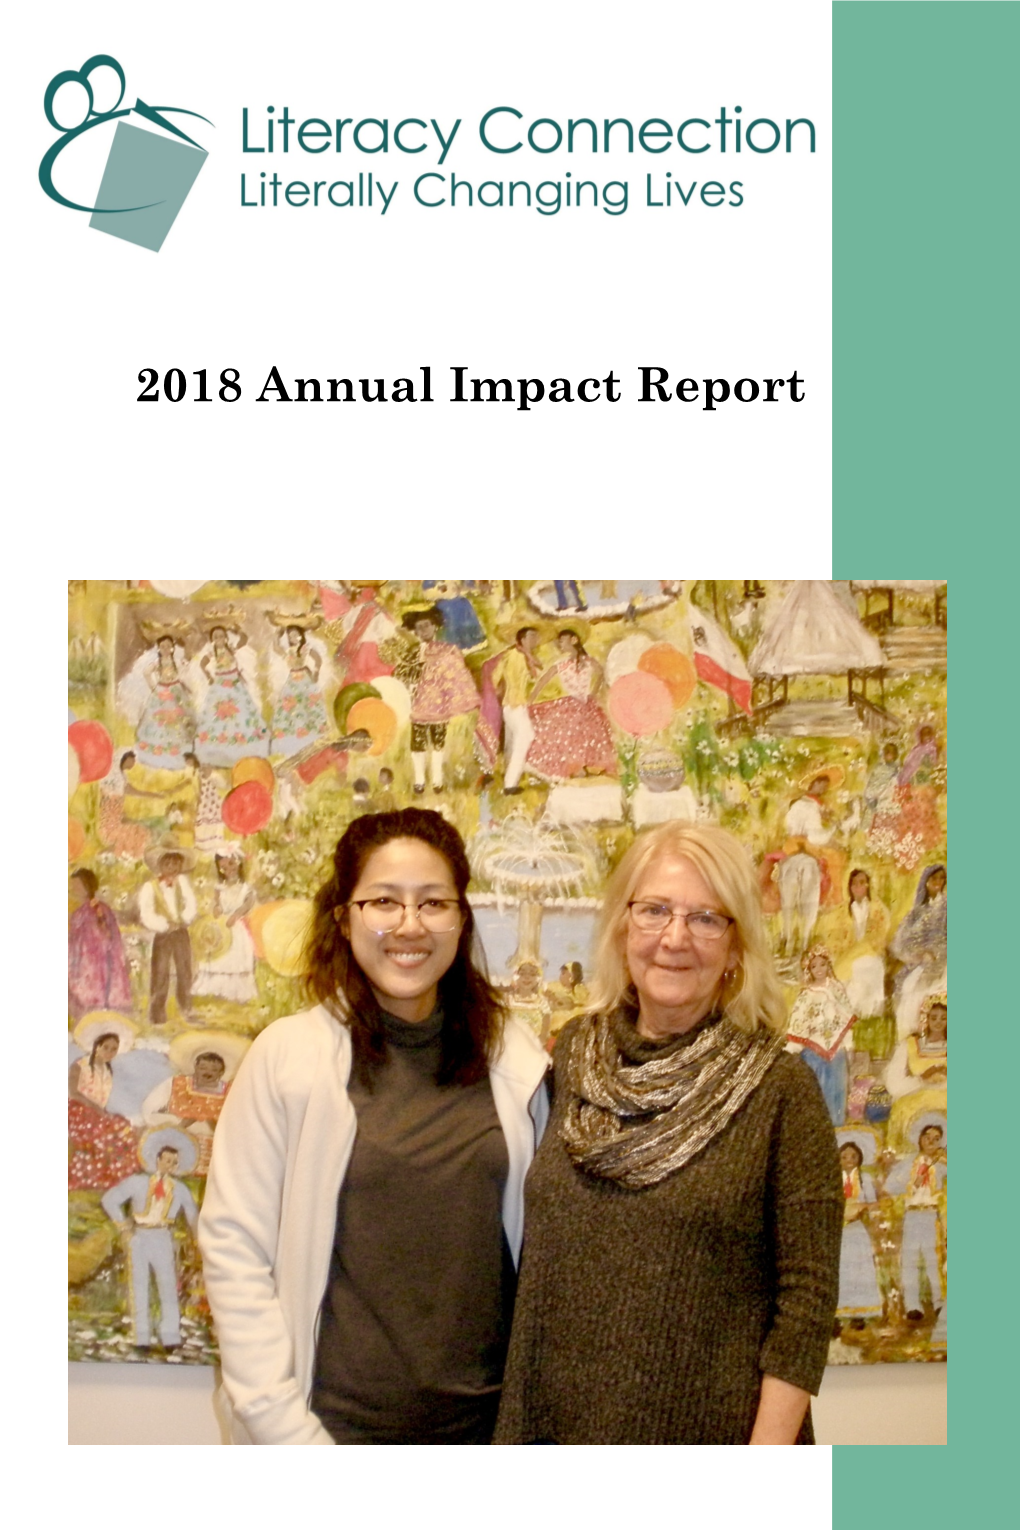 FY2018 Annual Report